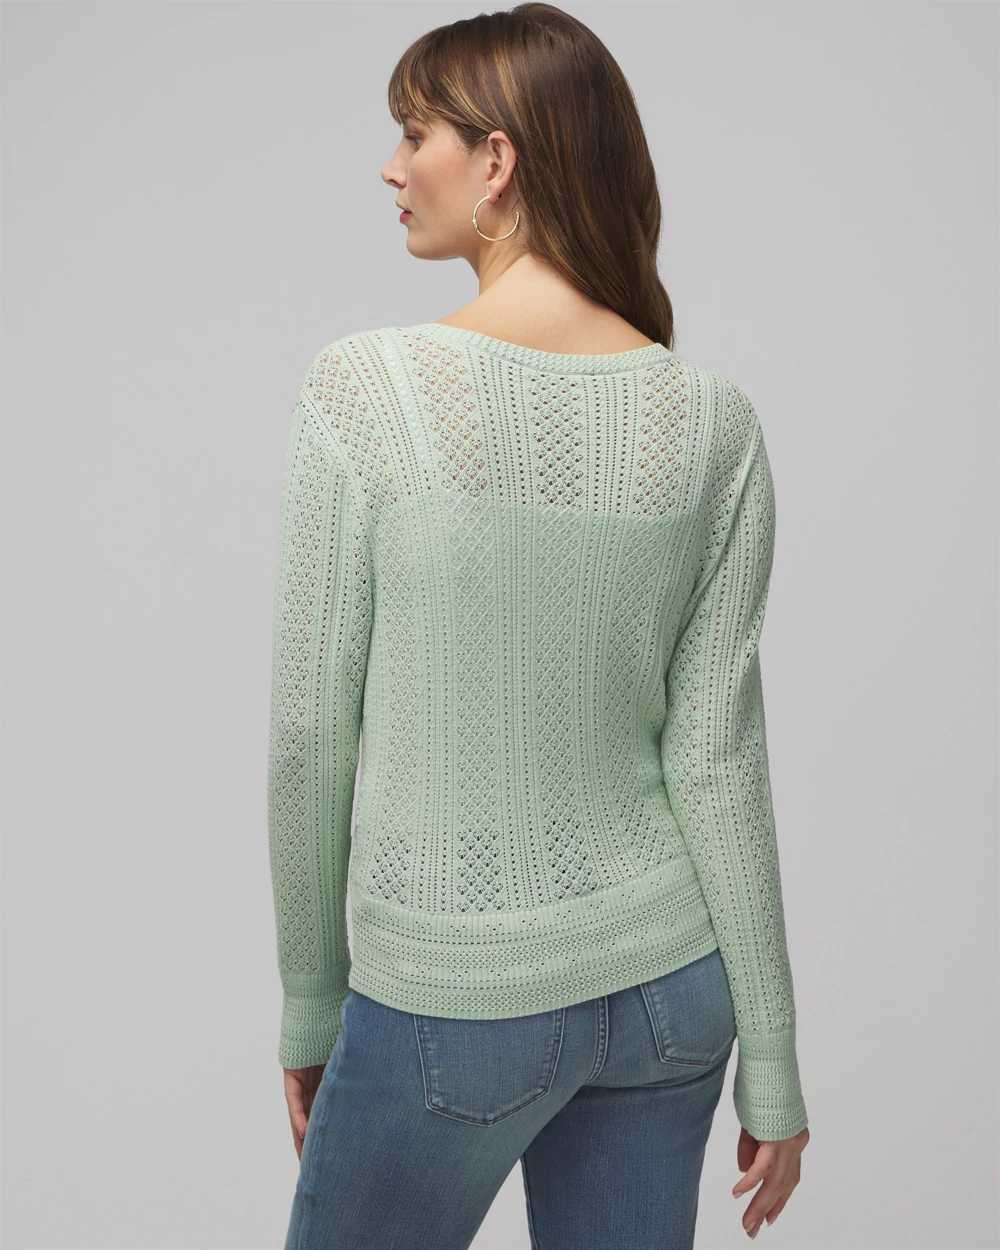 Long Sleeve Stitchy Surplice Pullover Sweater click to view larger image.